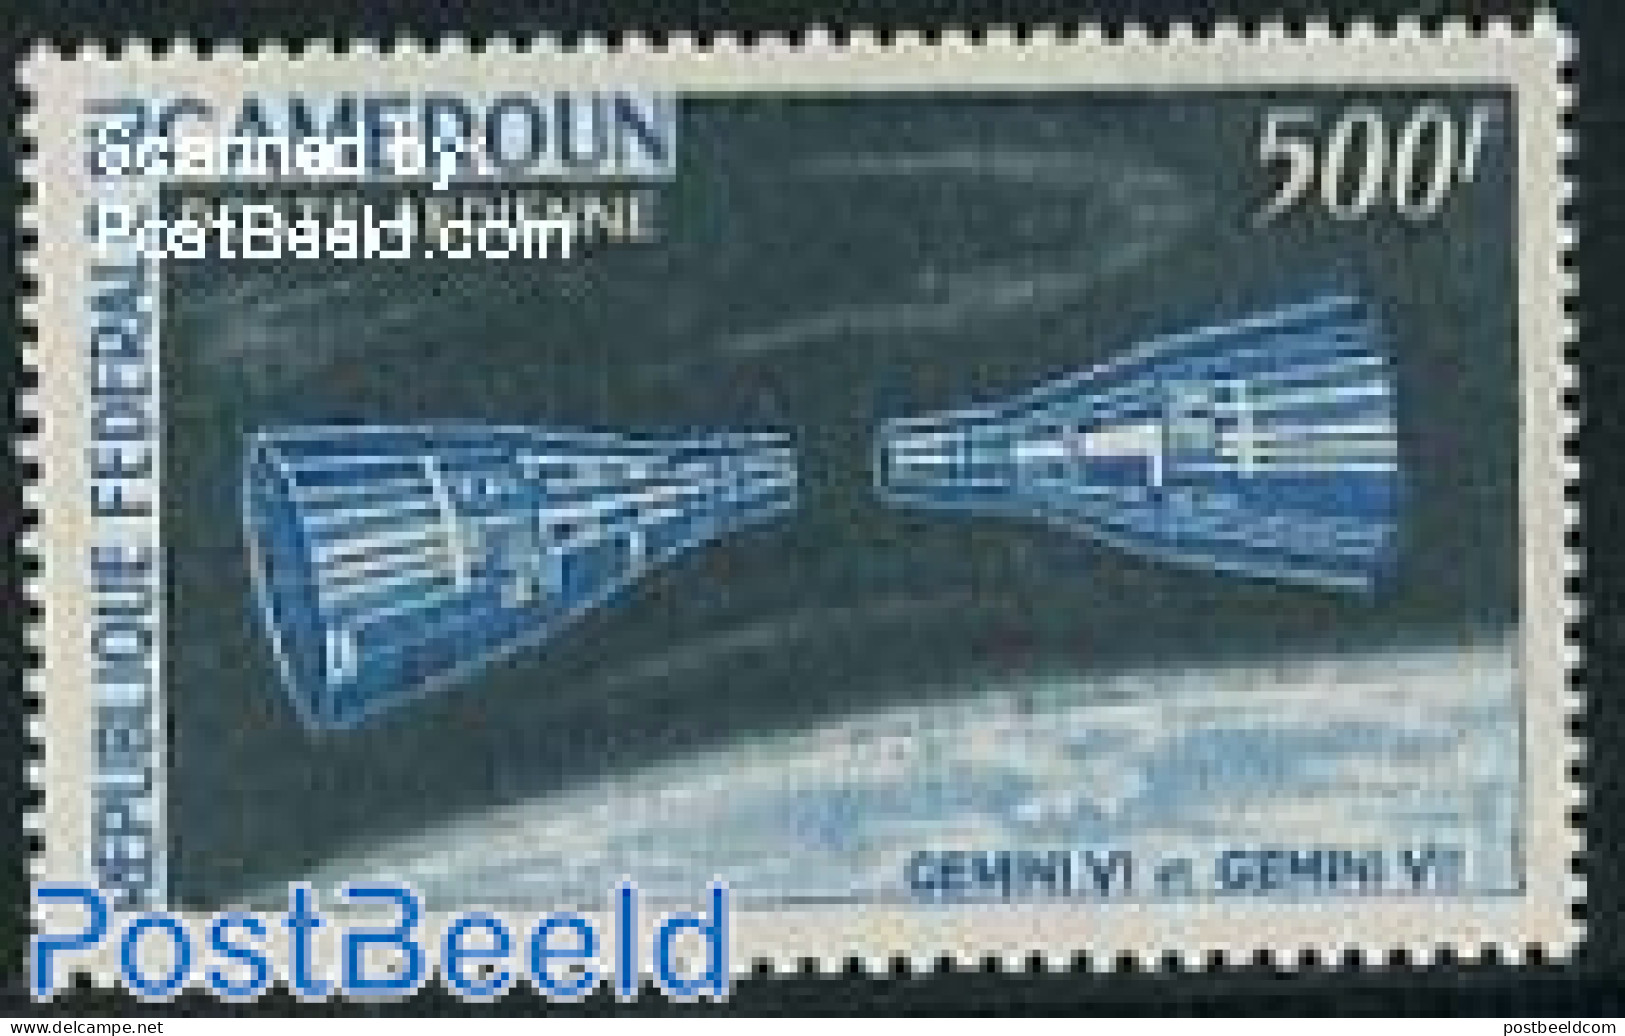 Cameroon 1966 500F, Stamp Out Of Set, Mint NH, Transport - Space Exploration - Cameroon (1960-...)